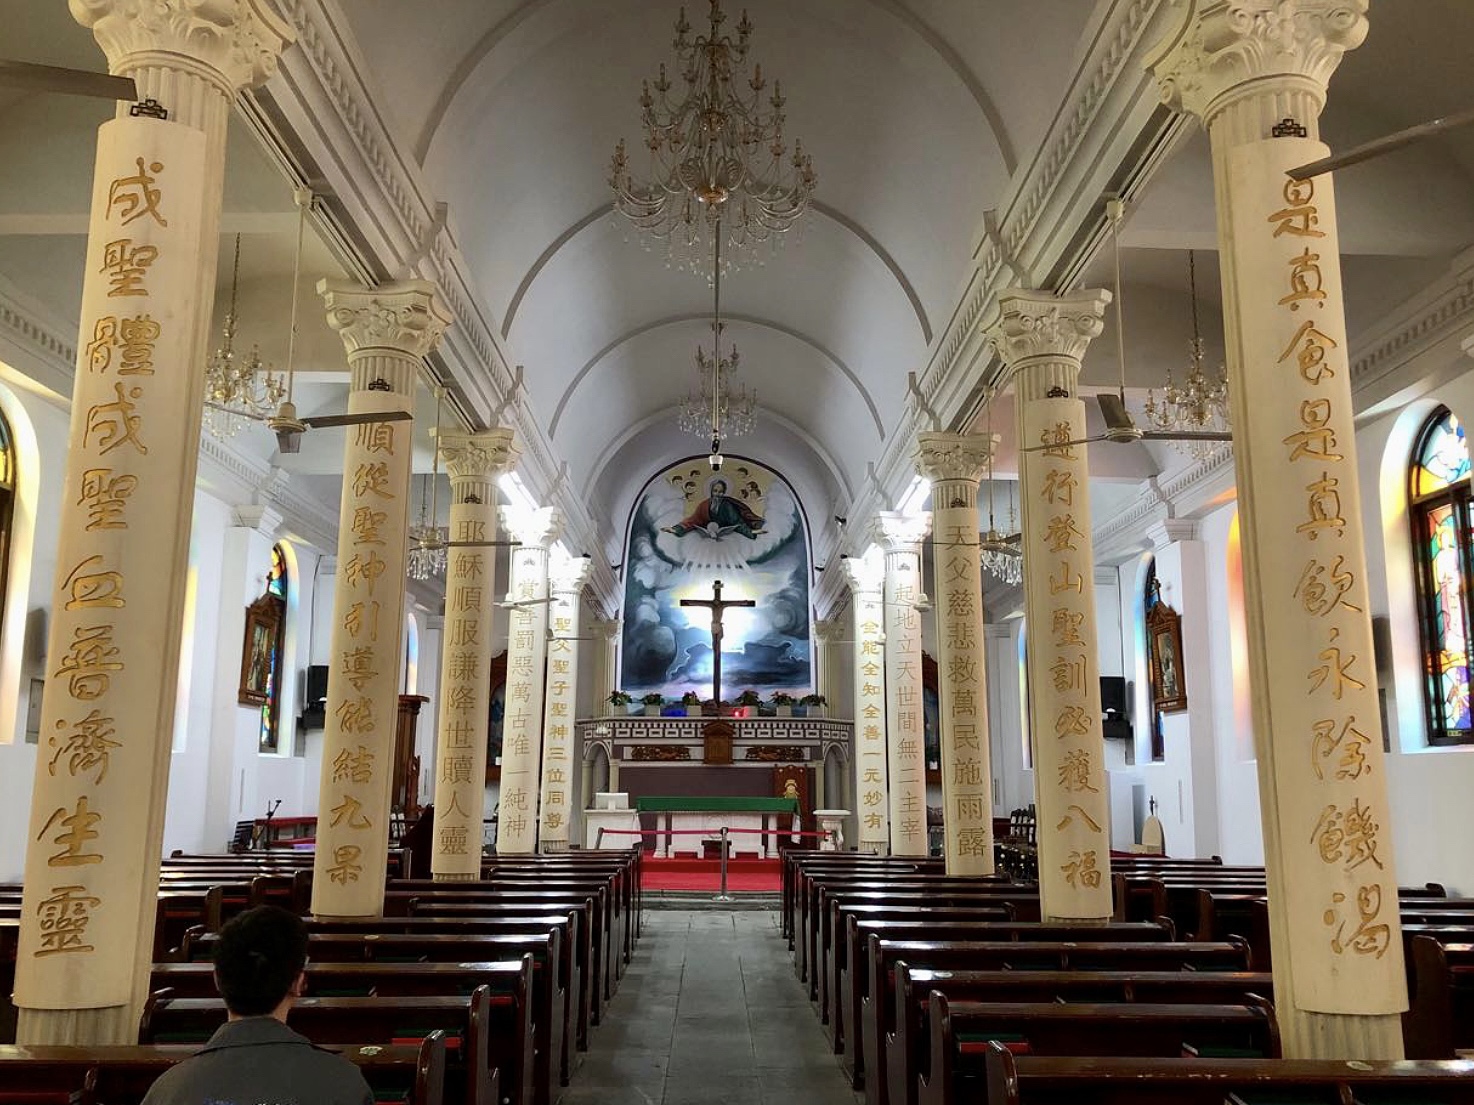  A picture of the interior of the Hangzhou Catholic Church in Zhejiang